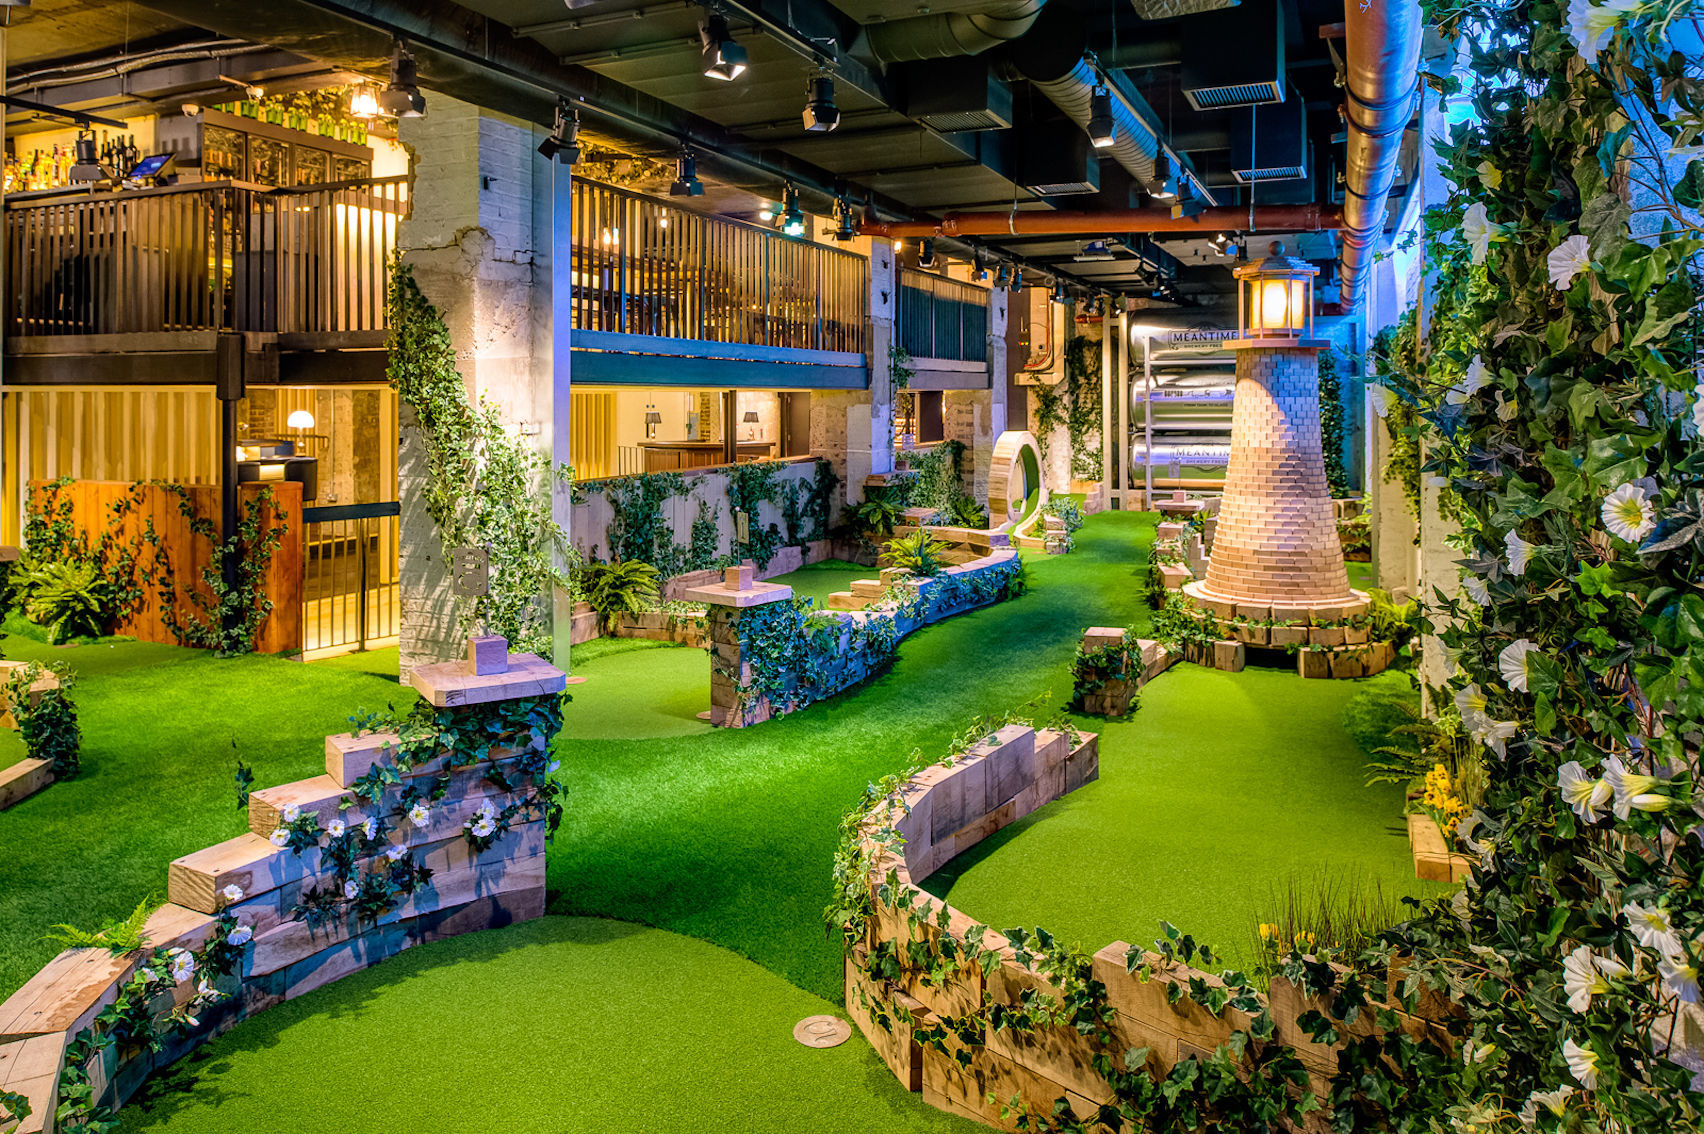 Indoor crazy golf course with bar area lit by bright yellow lighting